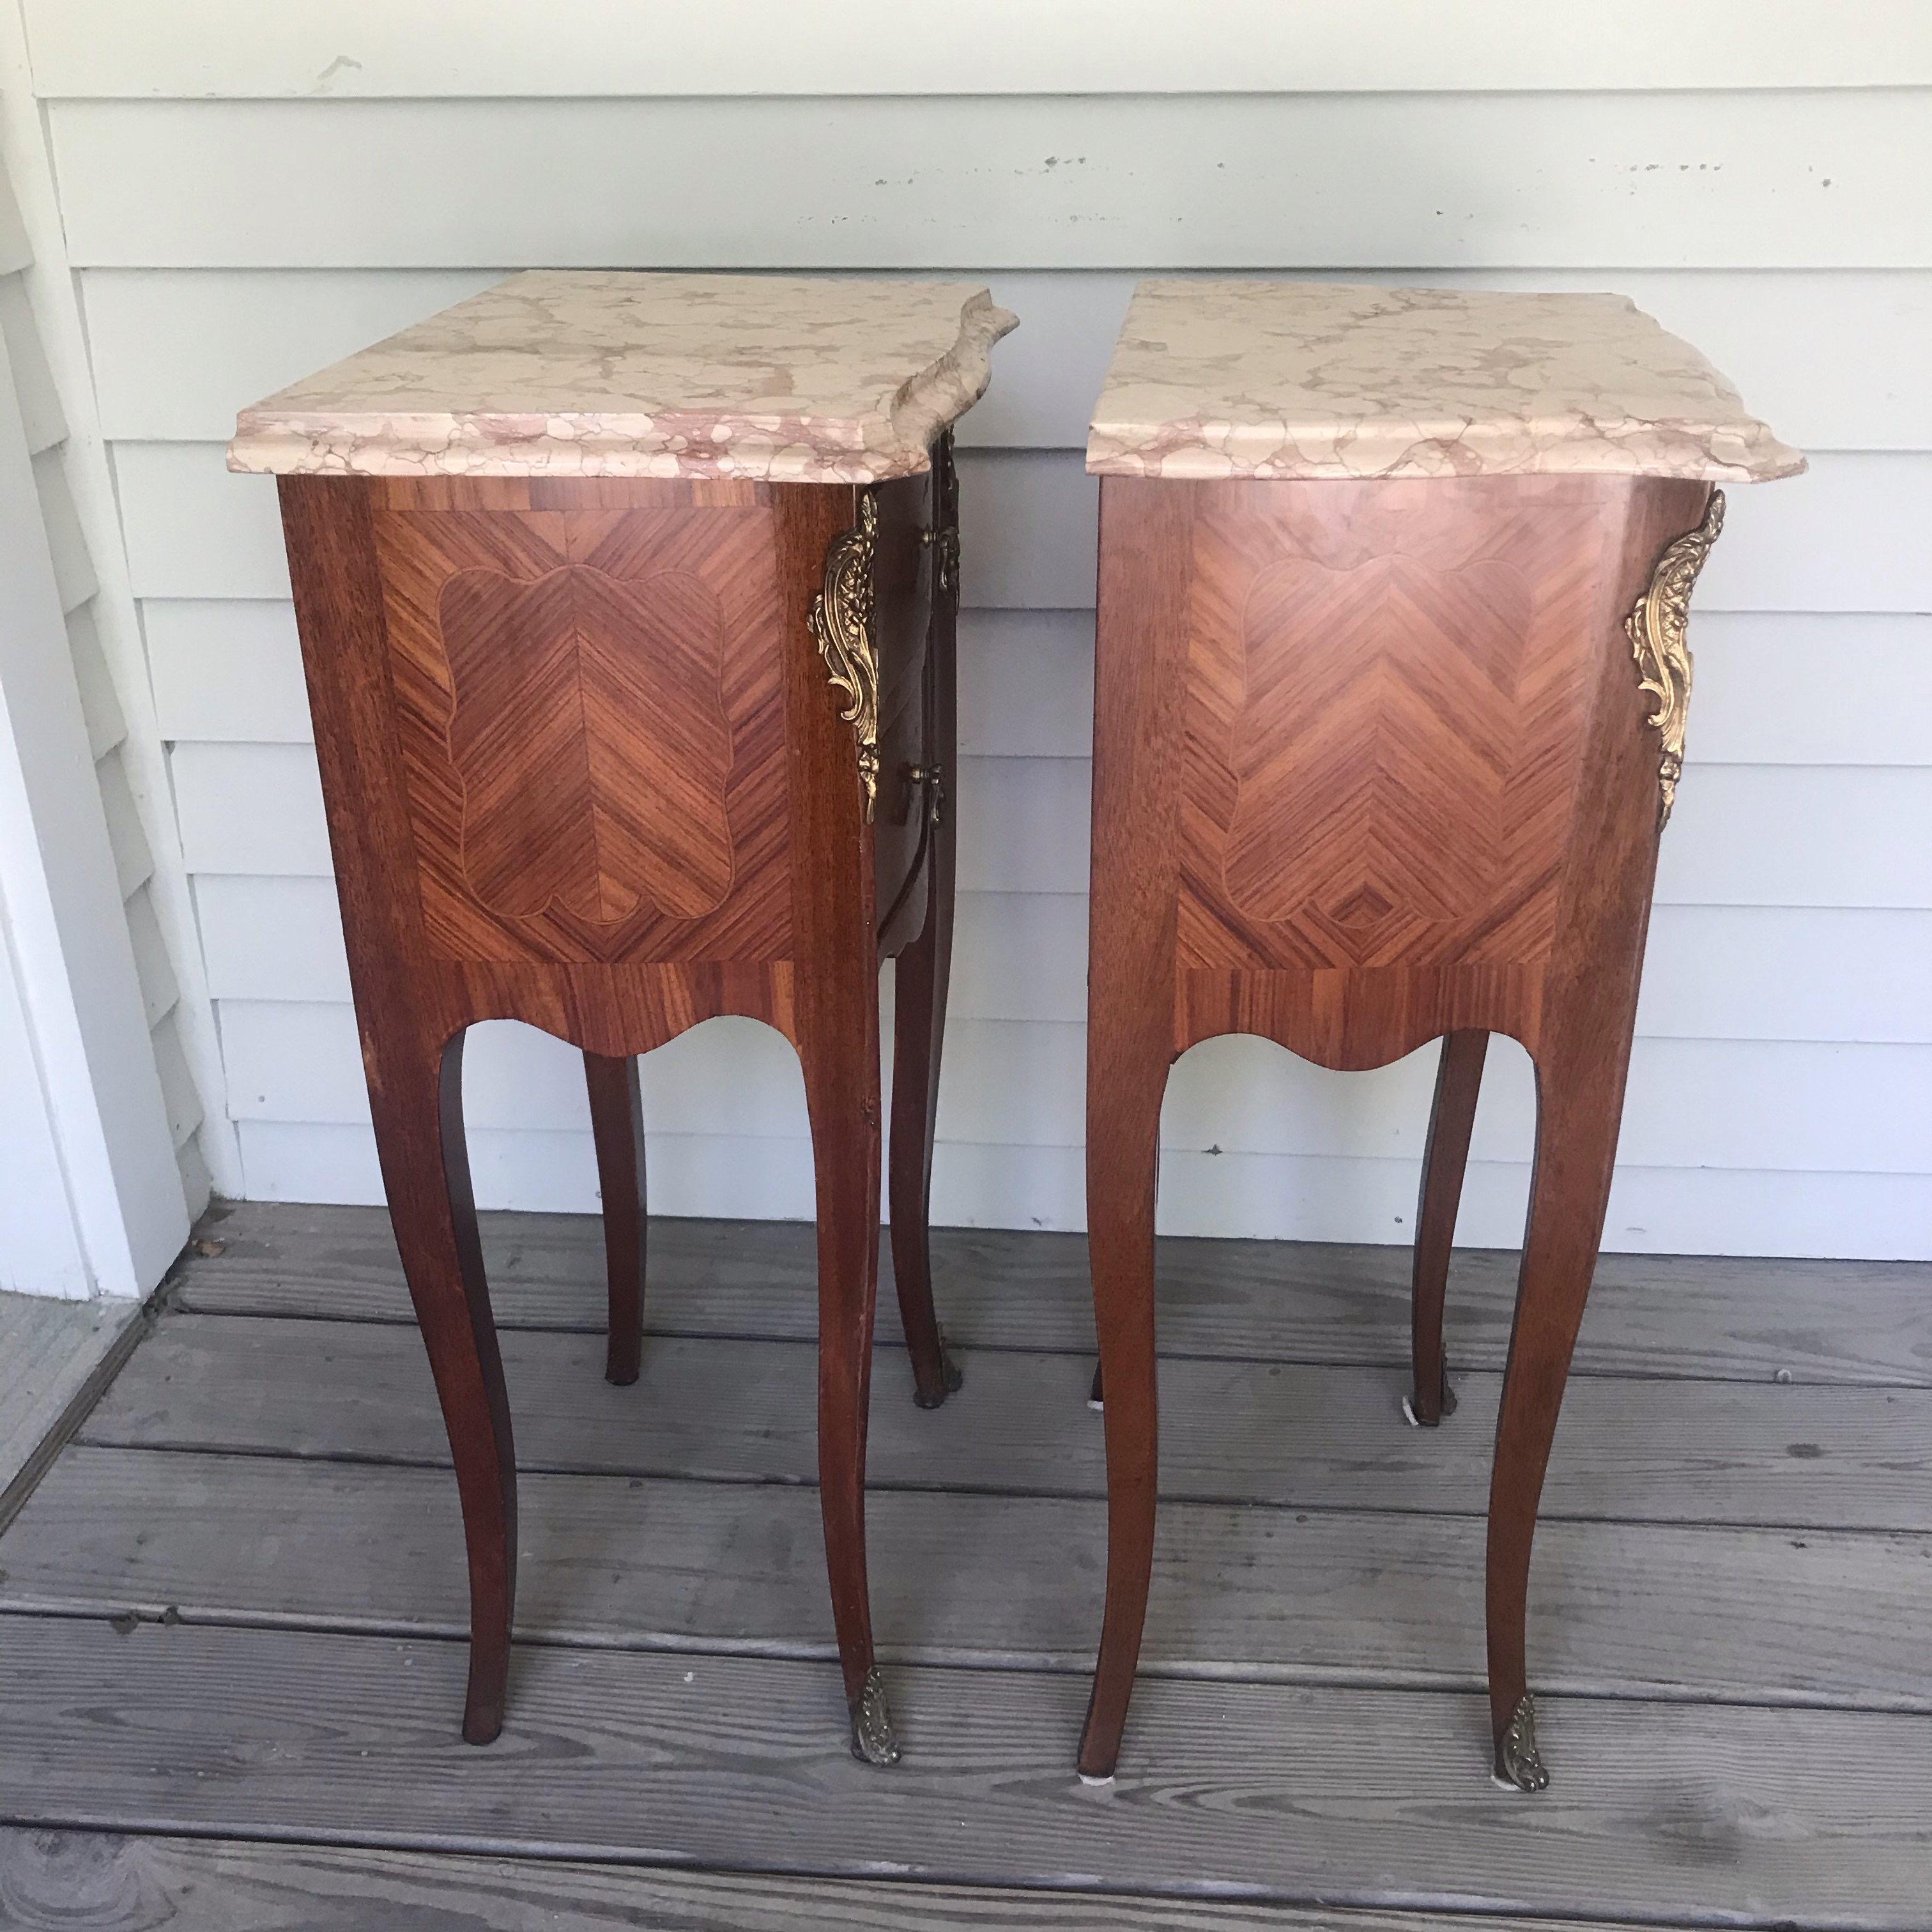 Mid-20th Century Pair of French Antique Marble-Top Nightstands or Bedside Tables